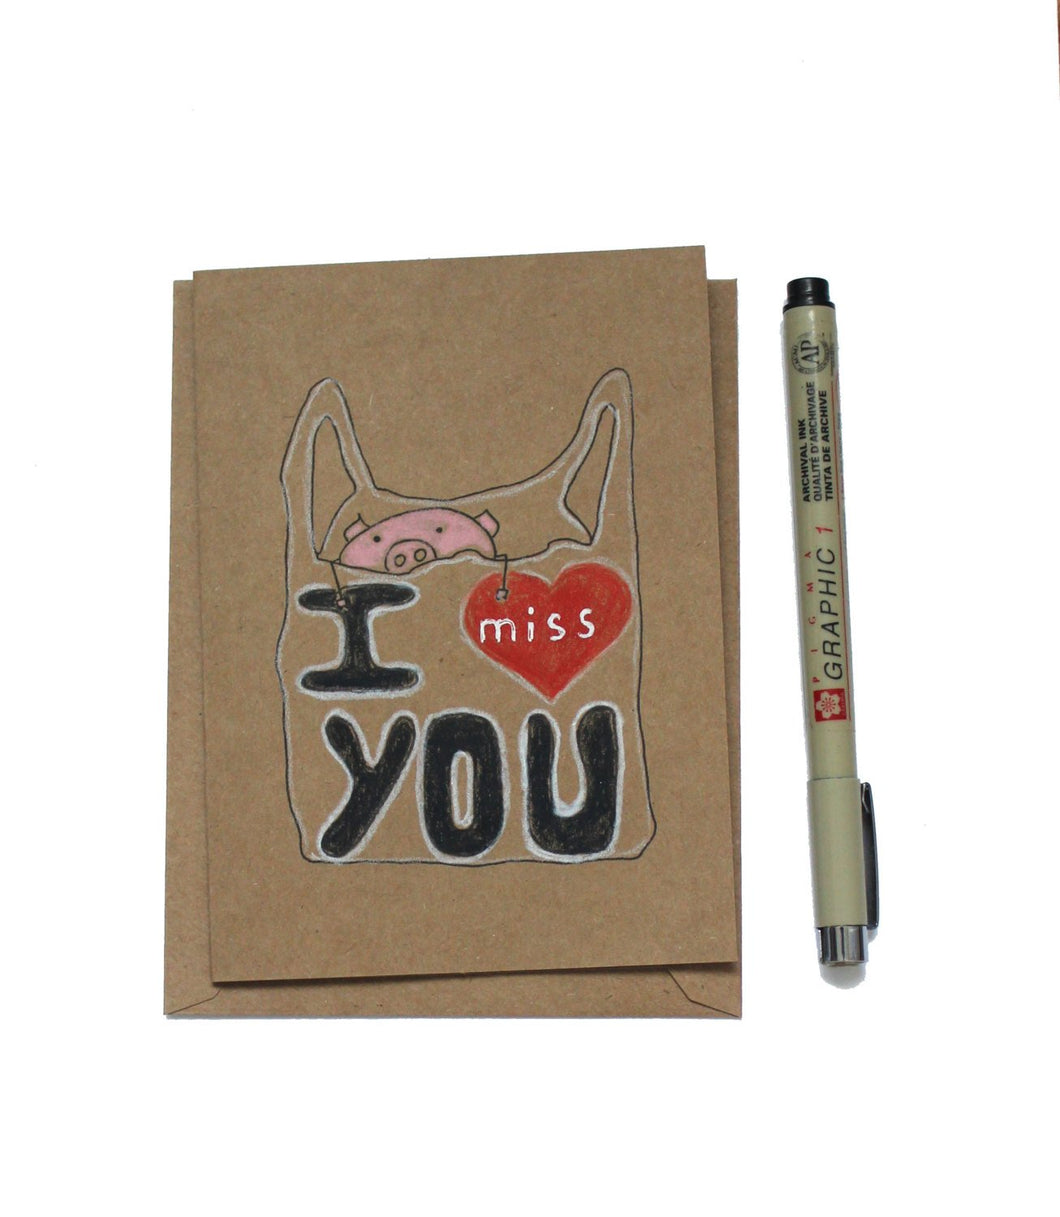 Miss you card/ long distance relationship card/ thinking of you boyfriend/ miss you card girlfriend/ long distance relationship card/